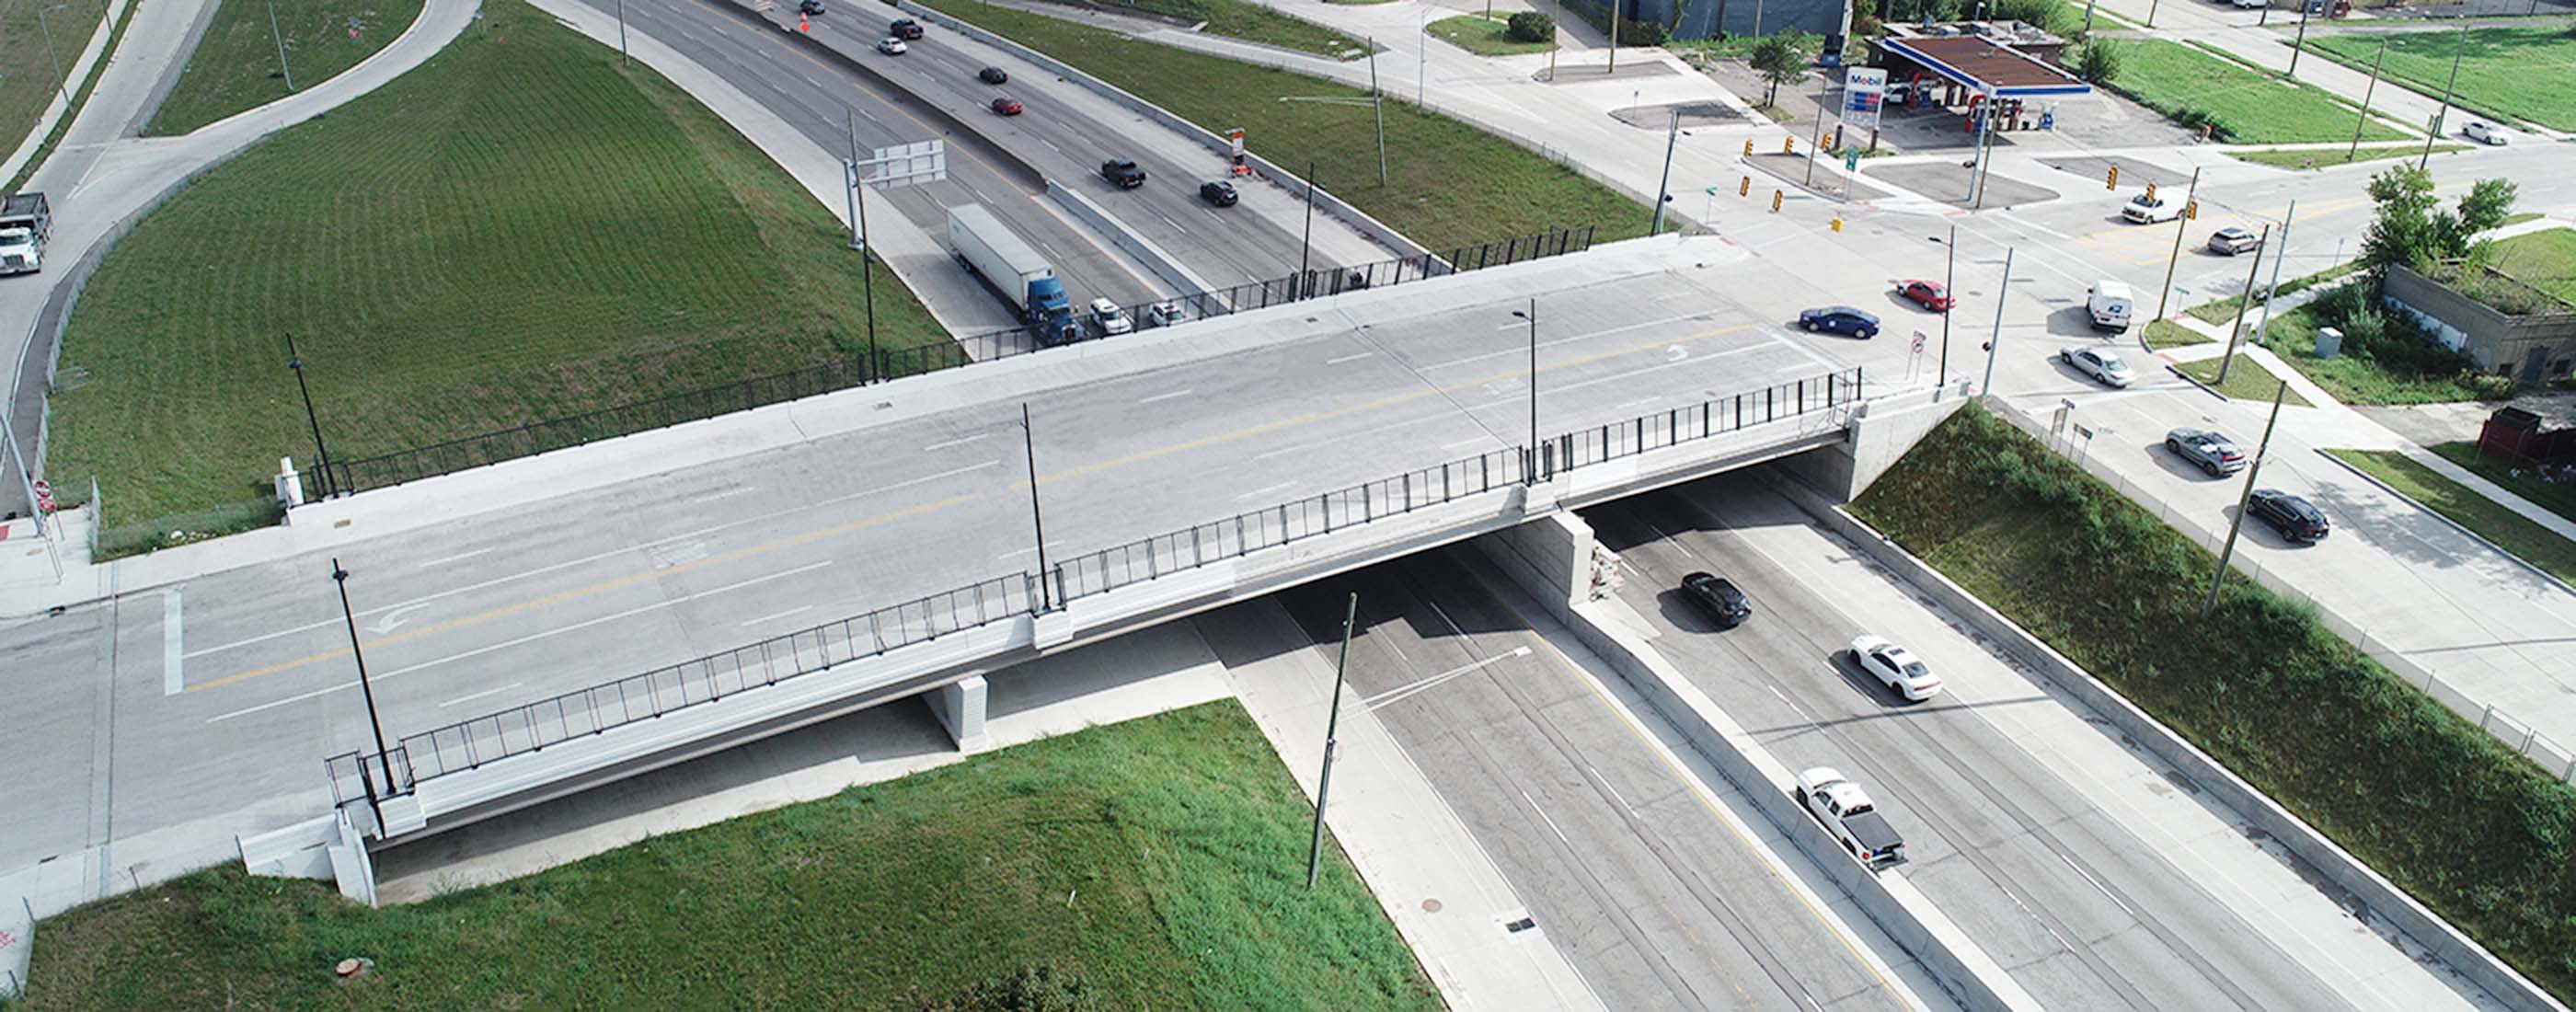 The bridge over I-94 was designed to accommodate the existing configuration as well as proposed future reconfiguration.